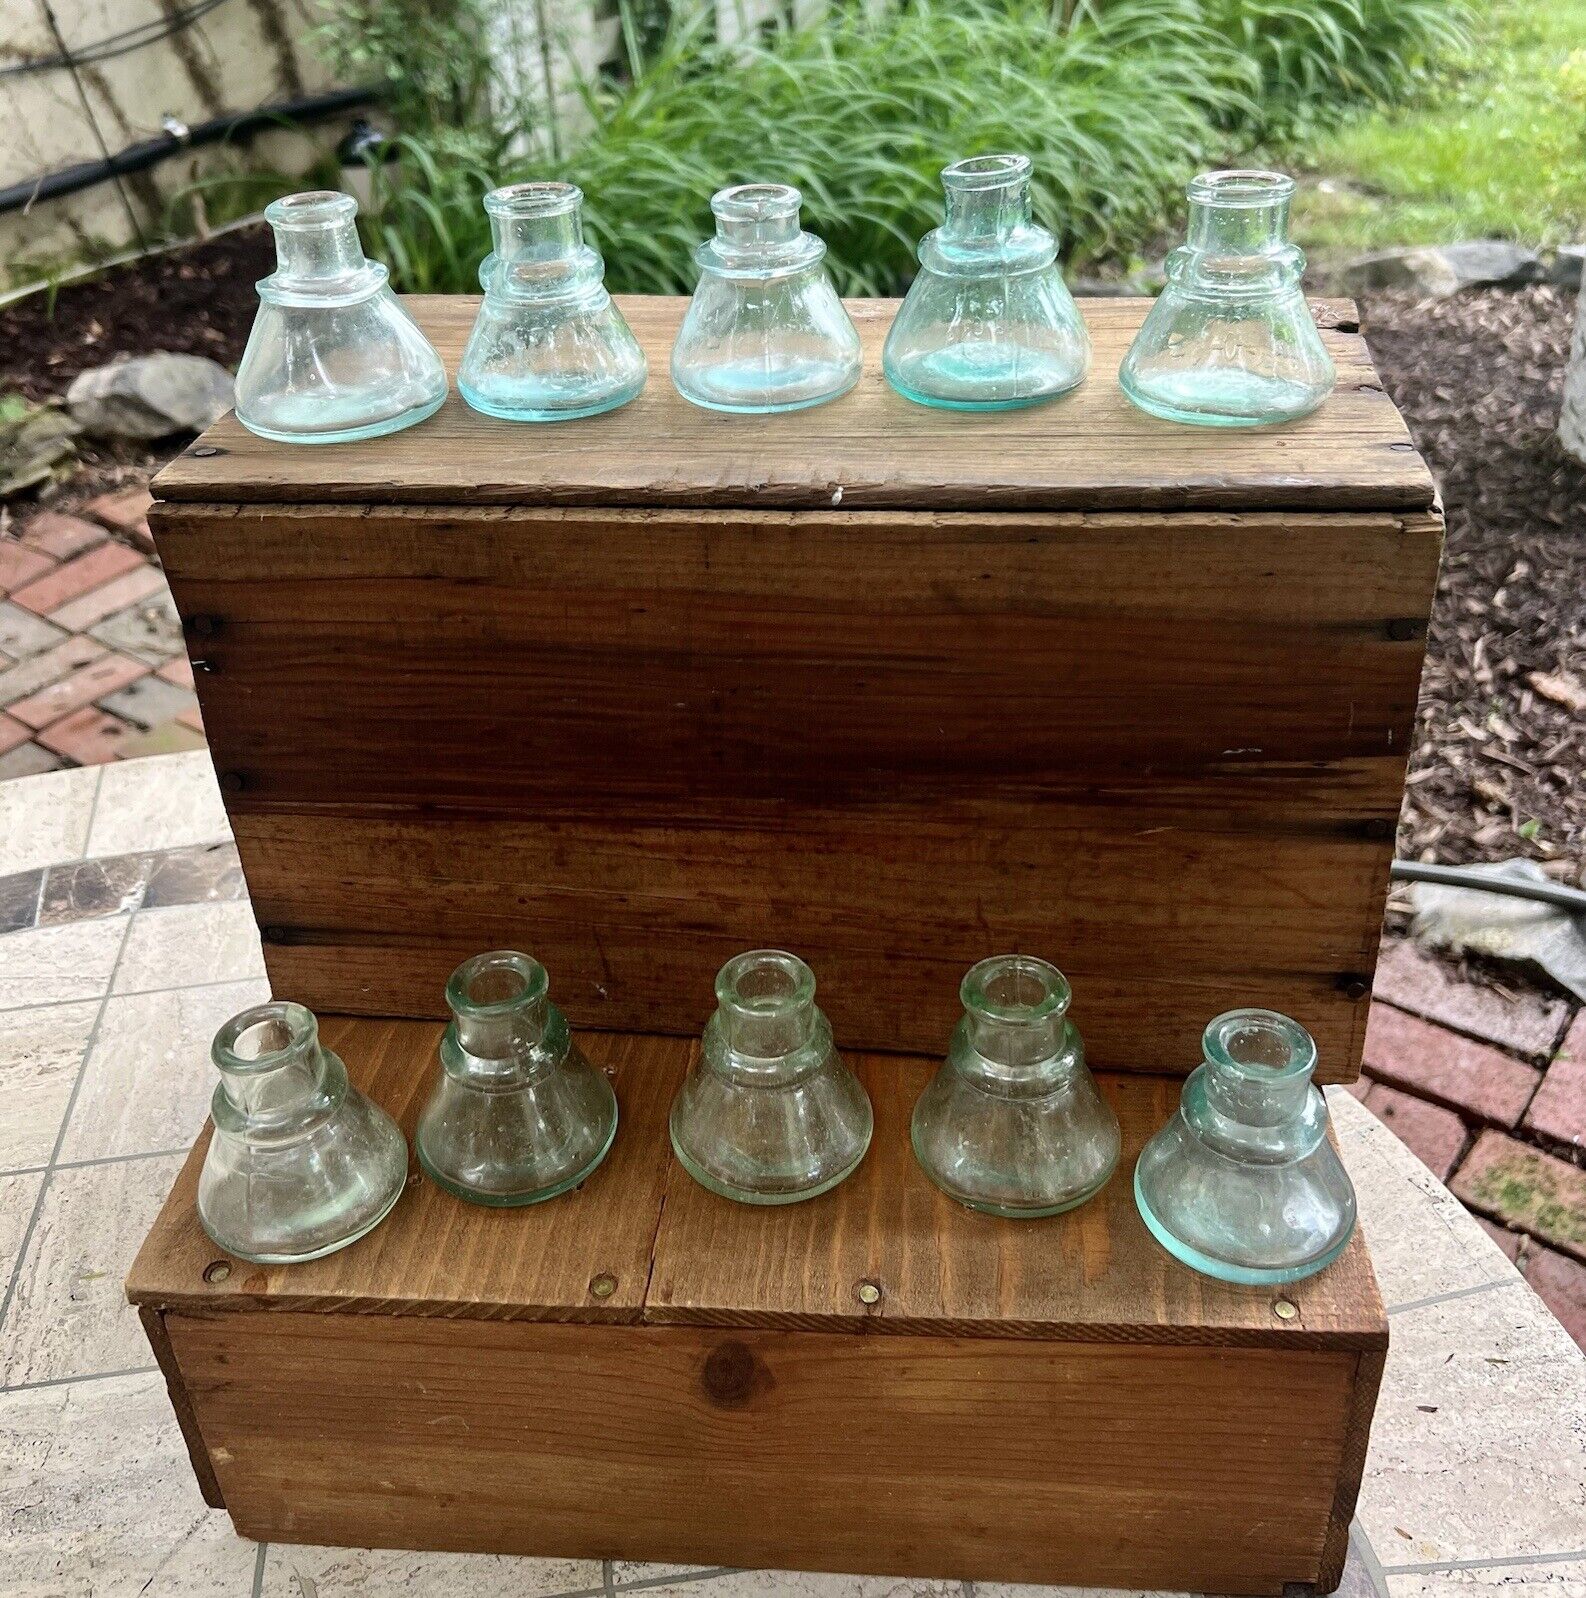 10 Late 1800’s Cone Ink Bottles, Blue, Apple and Aqua Colors